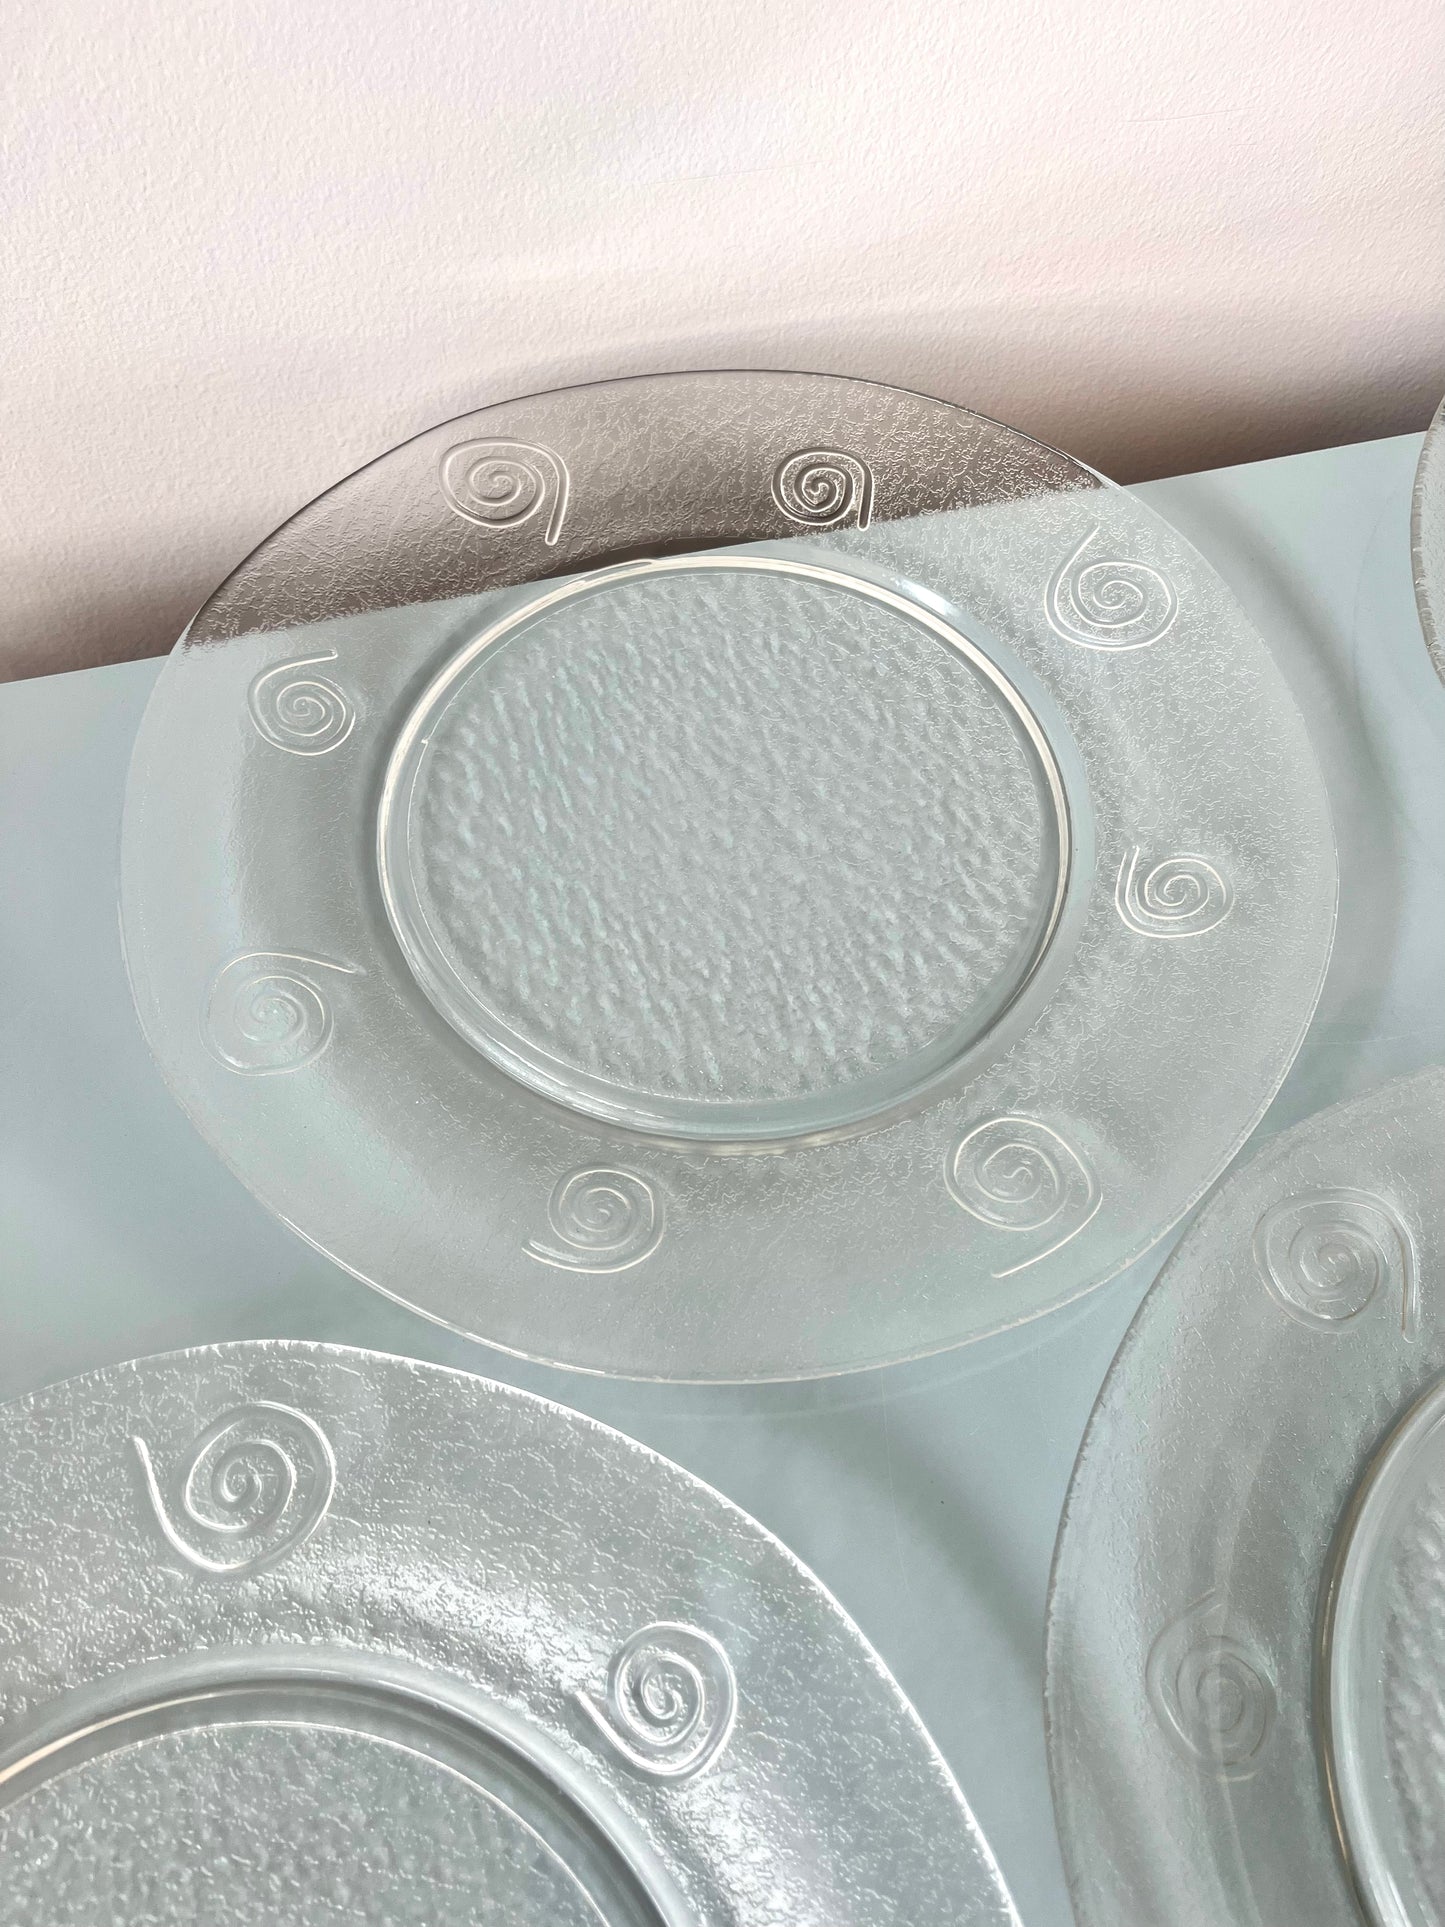 Postmodern Textured Glass Lunch Plates with Swirl Detail